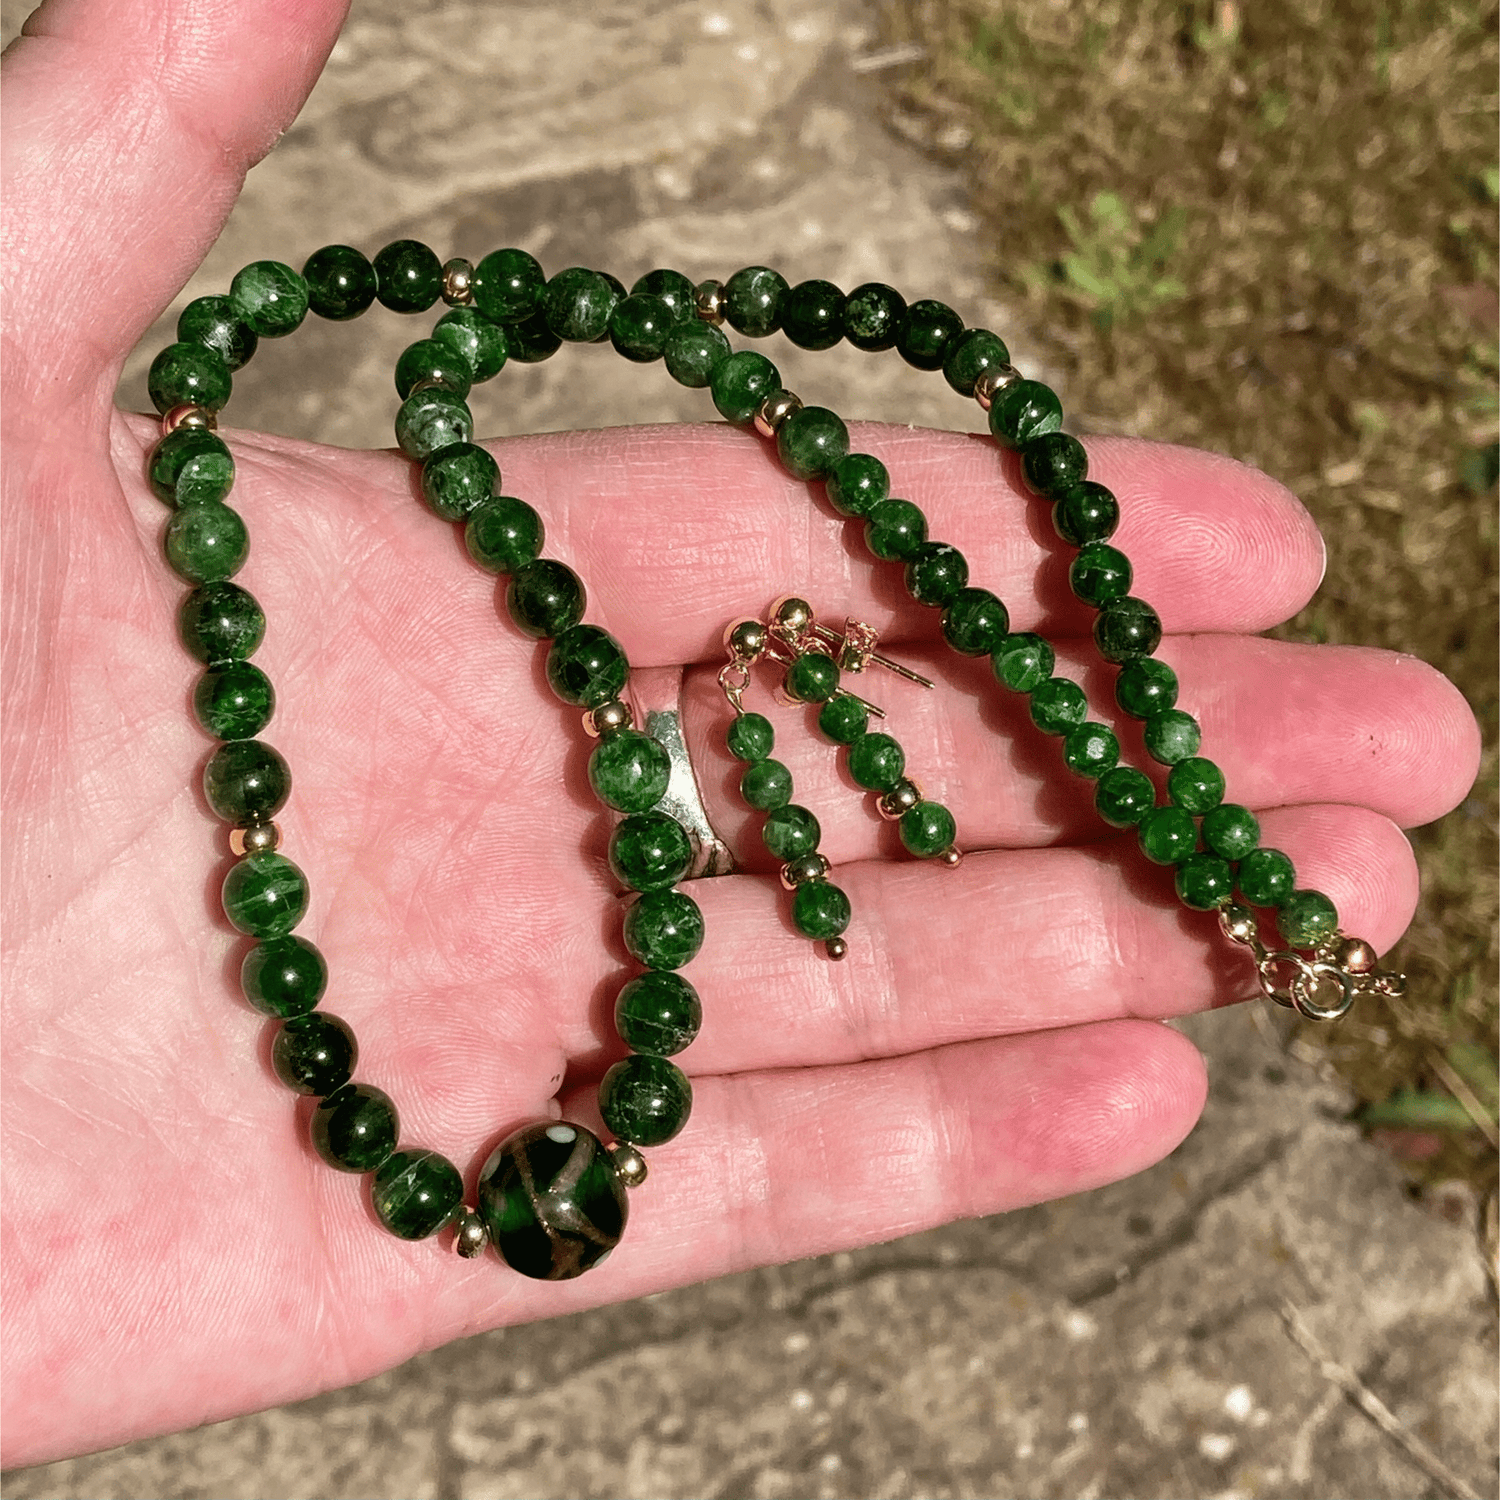 Handmade Russian Chrome Diopside Gemstone And Sterling Silver Necklace And Earrings Set